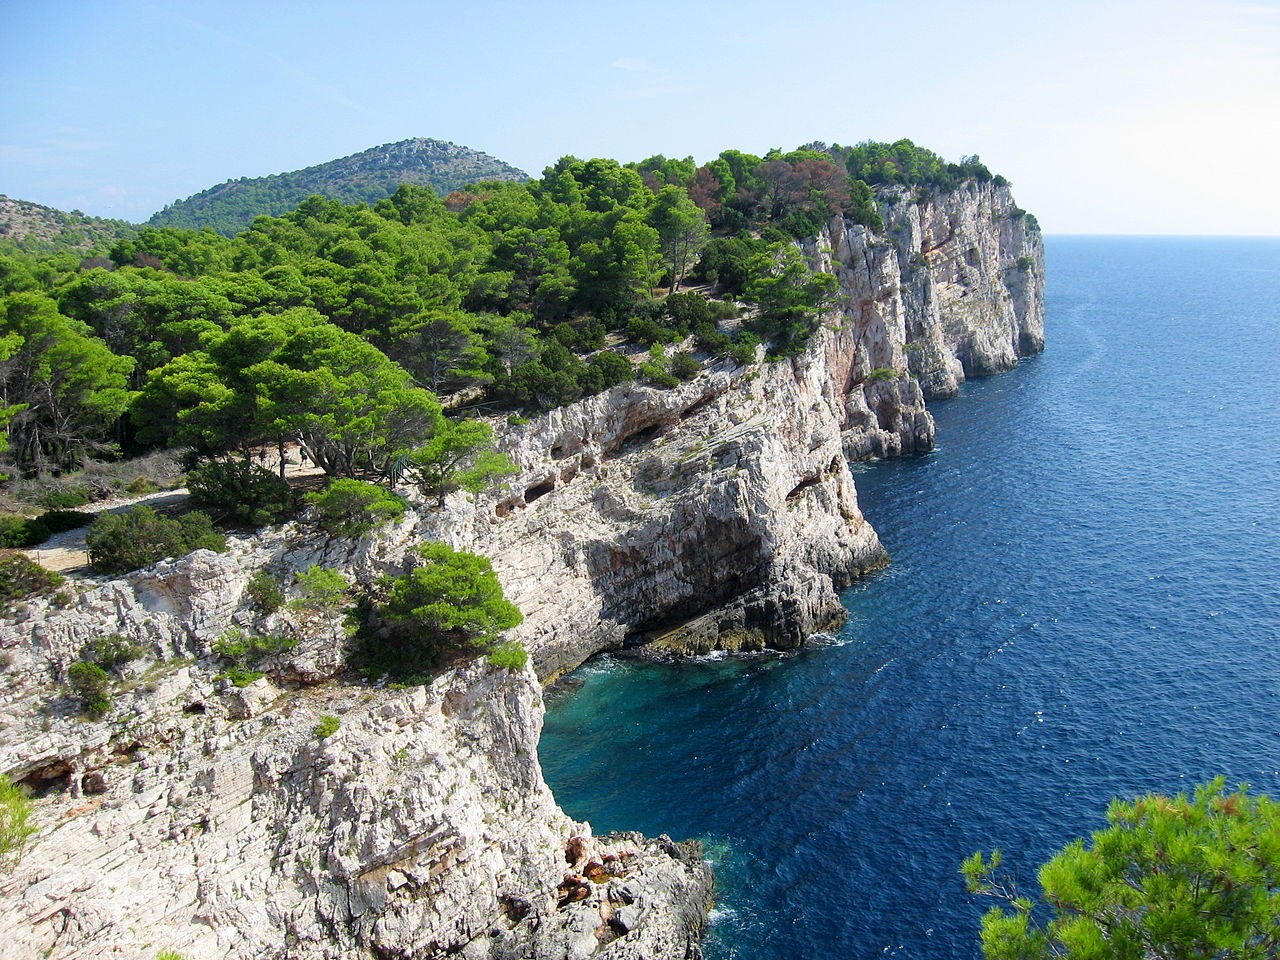 Rocks and green trees in Telascica bay